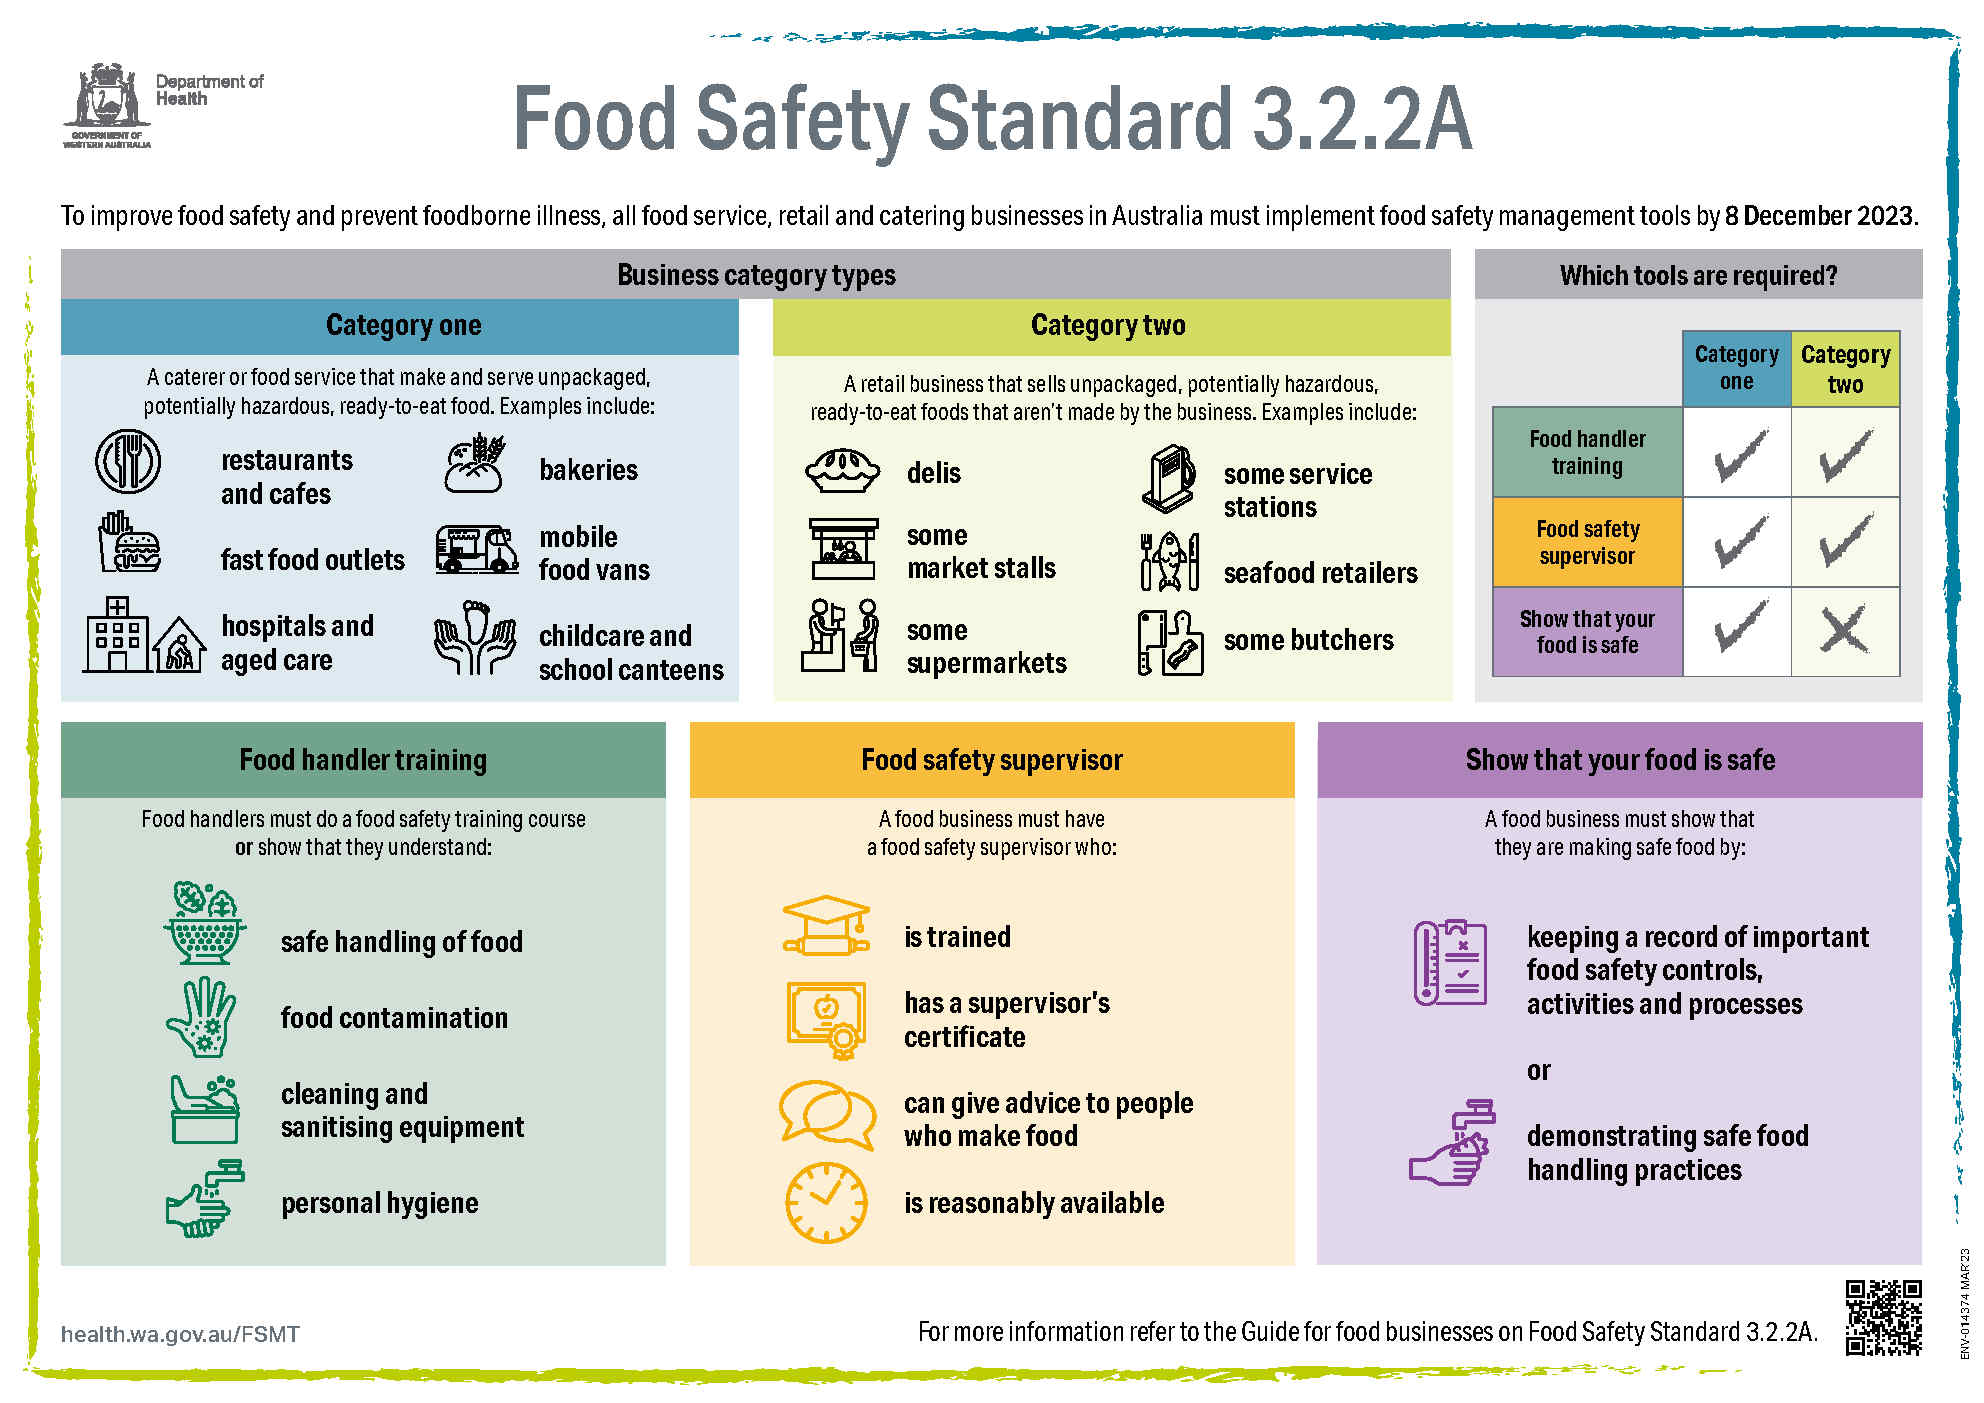 Food Safety Standard 3.2.2A Infographic.